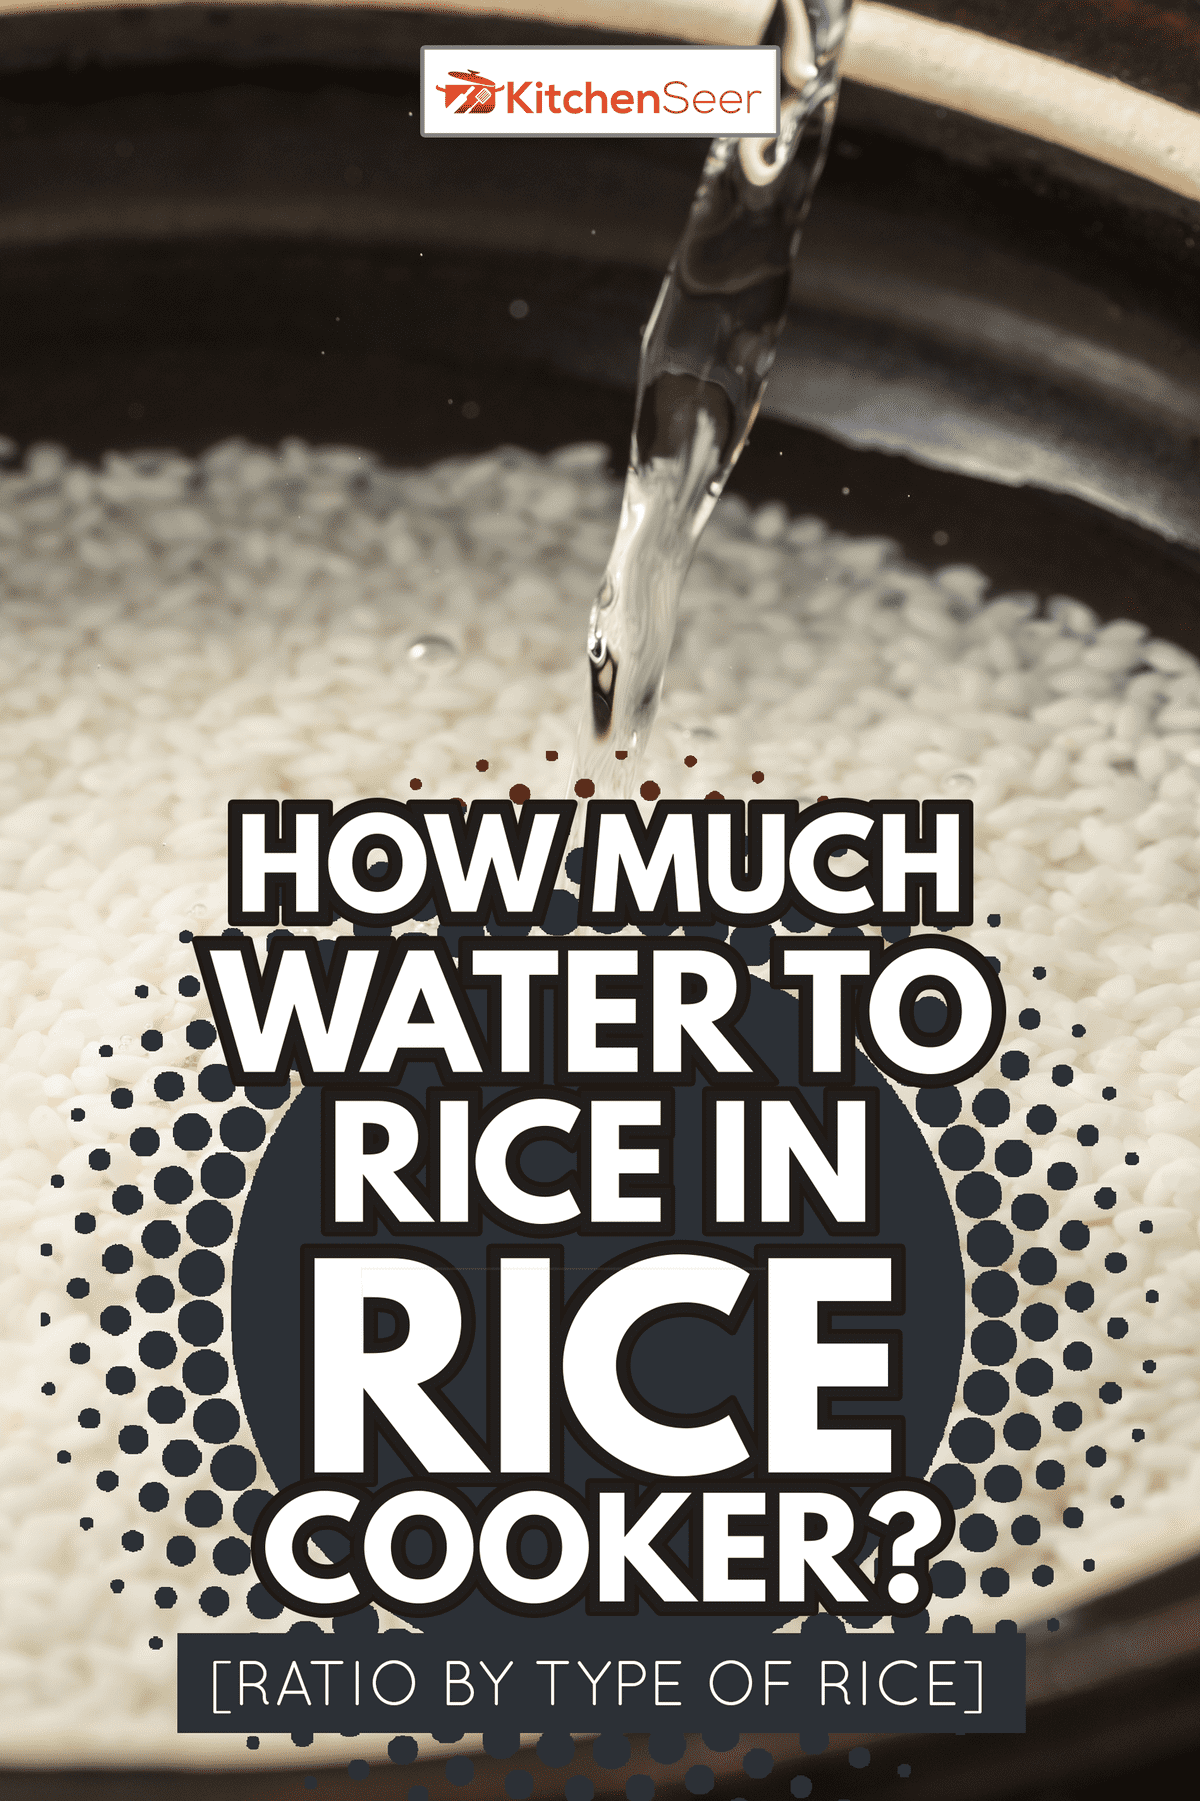 Pour water into rice - How Much Water To Rice In Rice Cooker [Ratio By Type Of Rice]